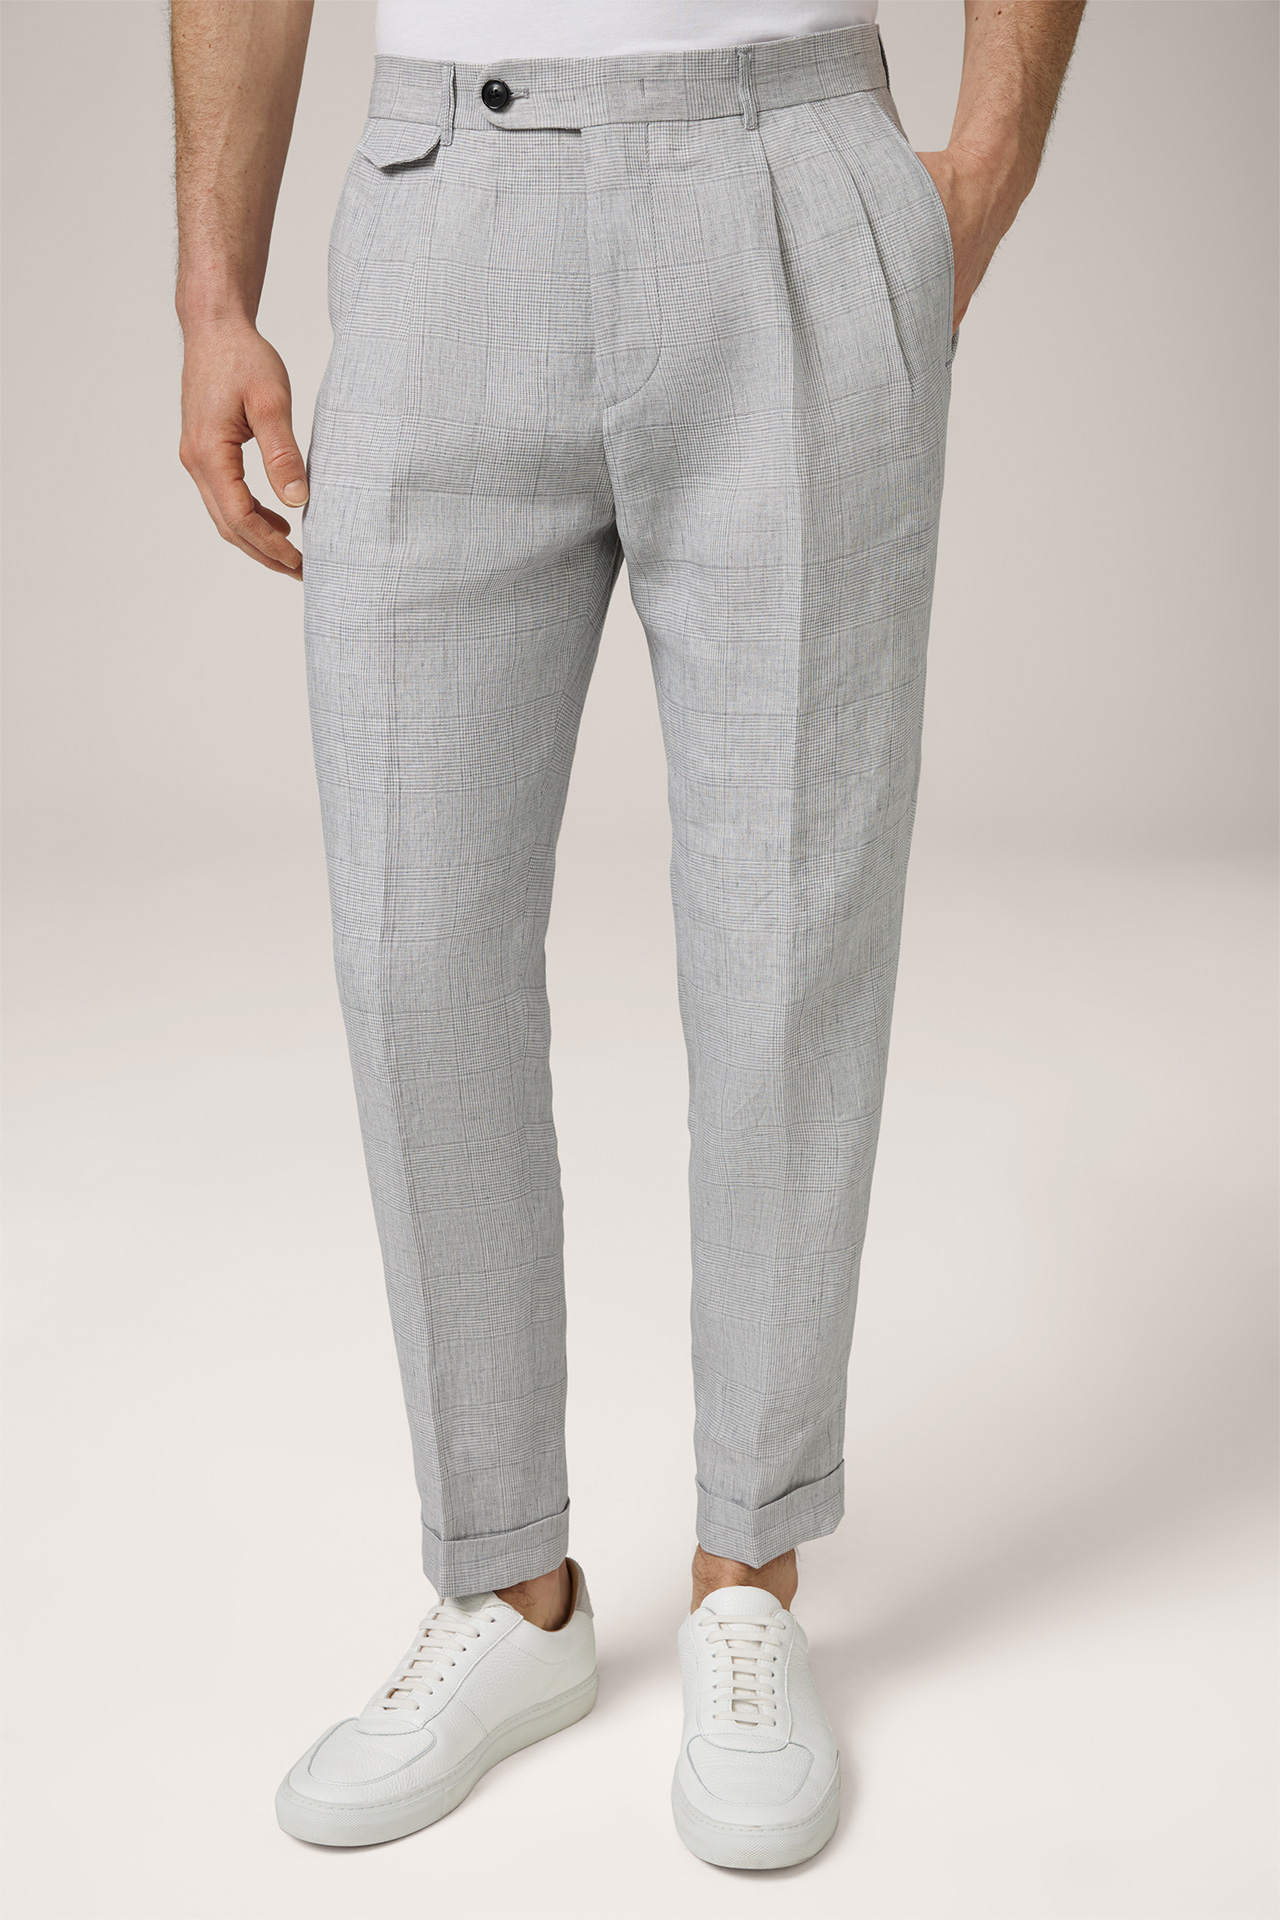 Sapo Linen Modular Pleated Trousers in Grey Patterned